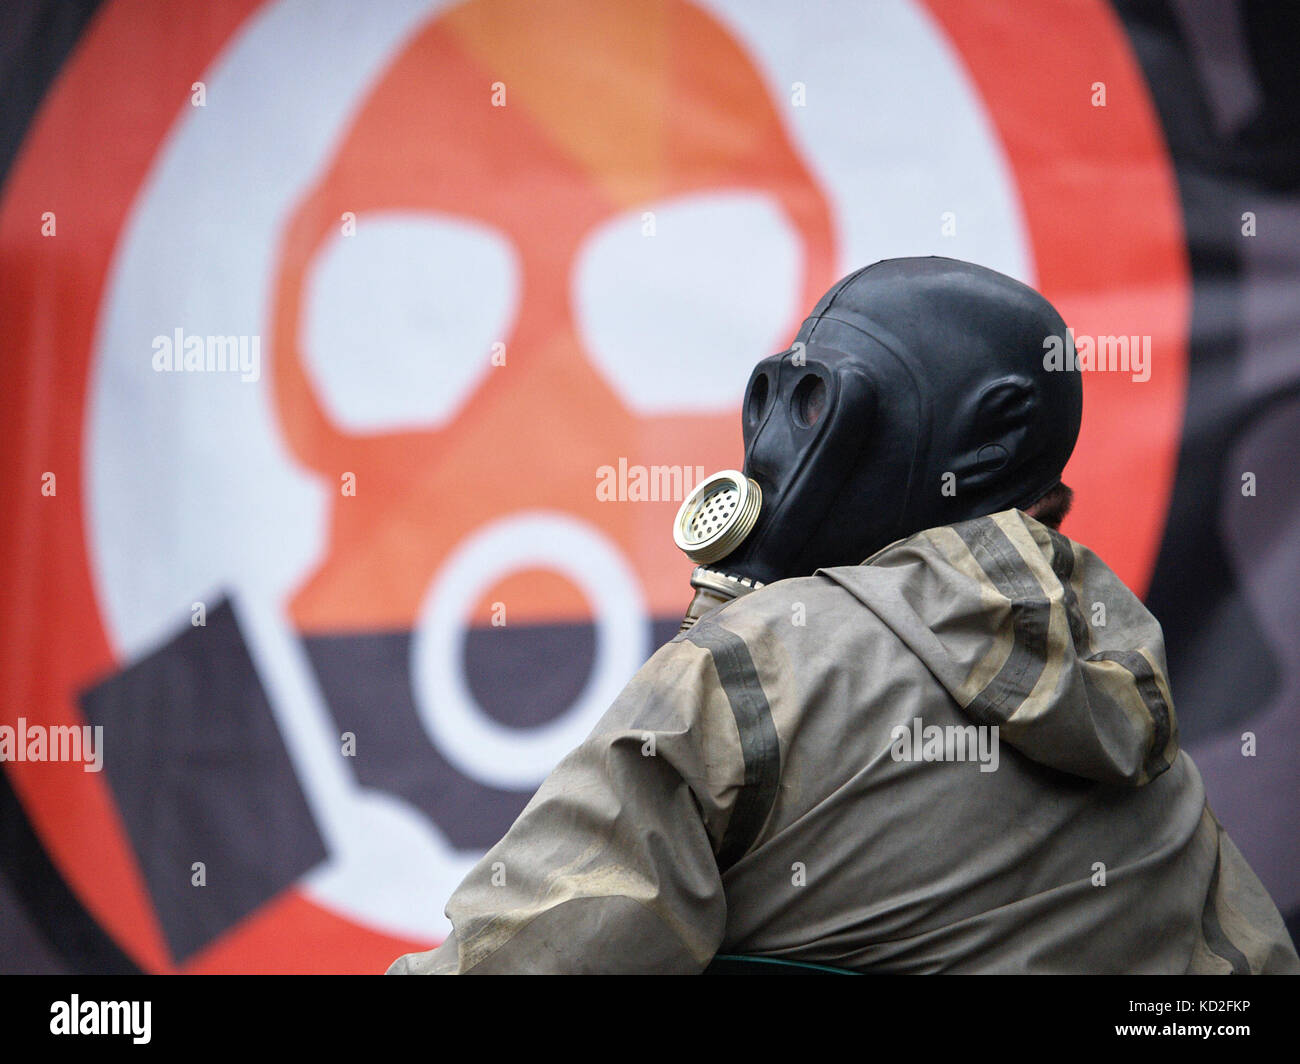 Kryvyi Rih, Ukraine - October 9, 2017: Man wearing black gas mask against poster with schematic gas mask during protest meeting near the ArcelorMittal Kryvyi Rih PJSC claim to reduce air pollution and conduct an independent audit of cleaning equipement at steel factory Credit: Dmytro Aliokhin/Alamy Live News Stock Photo